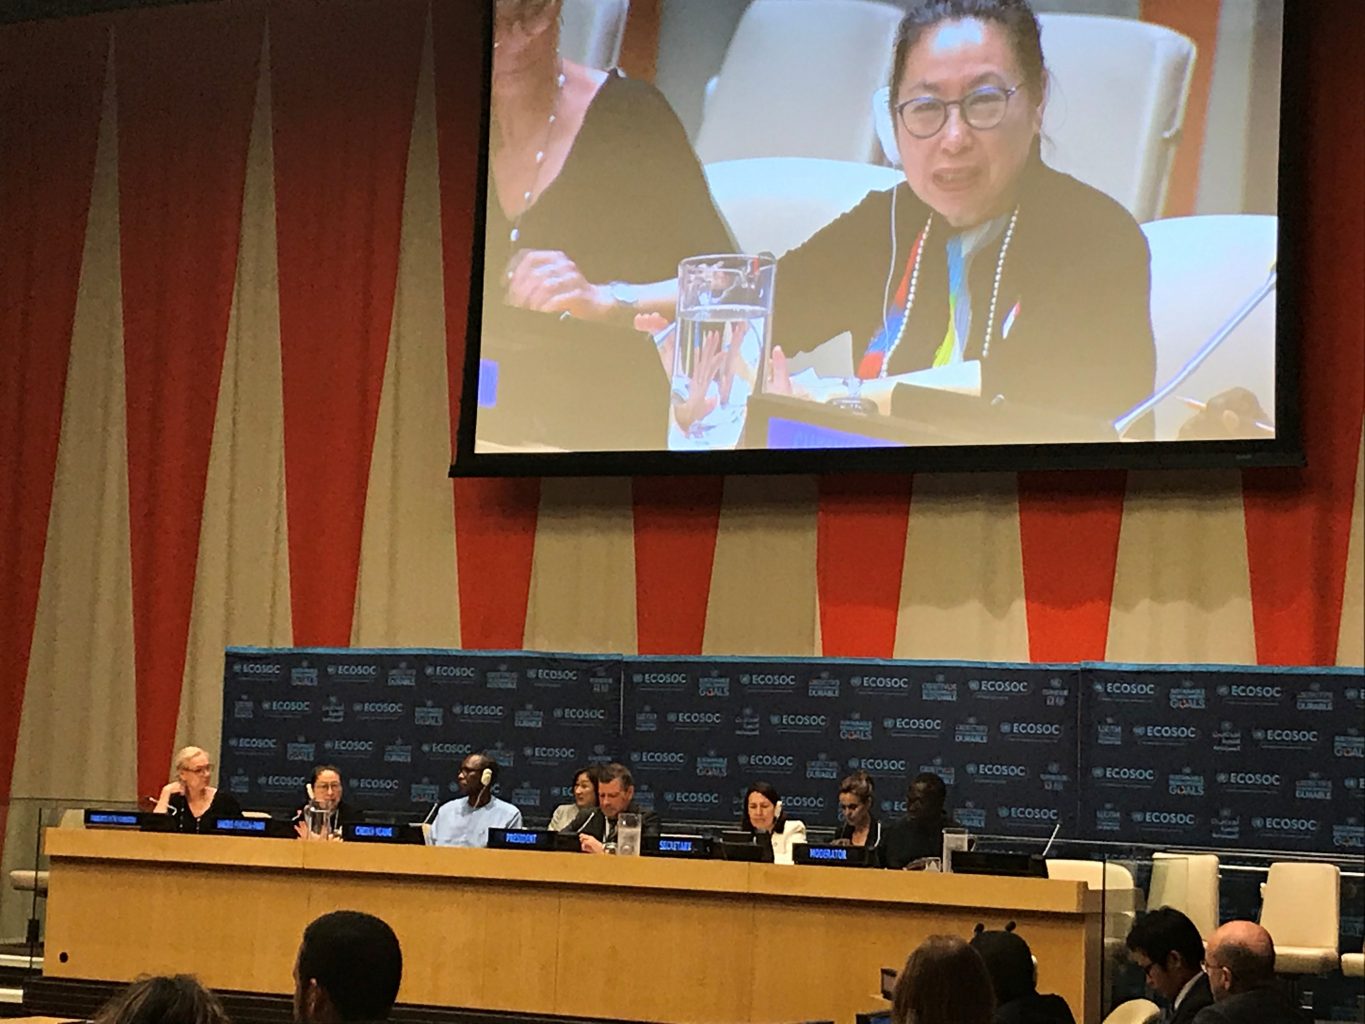 Professor Sakiko Fukuda-Parr, Vice-President of the Committee for Development Policy (CDP), participating as a panelist in the ECOSOC Integration Segment on July 8